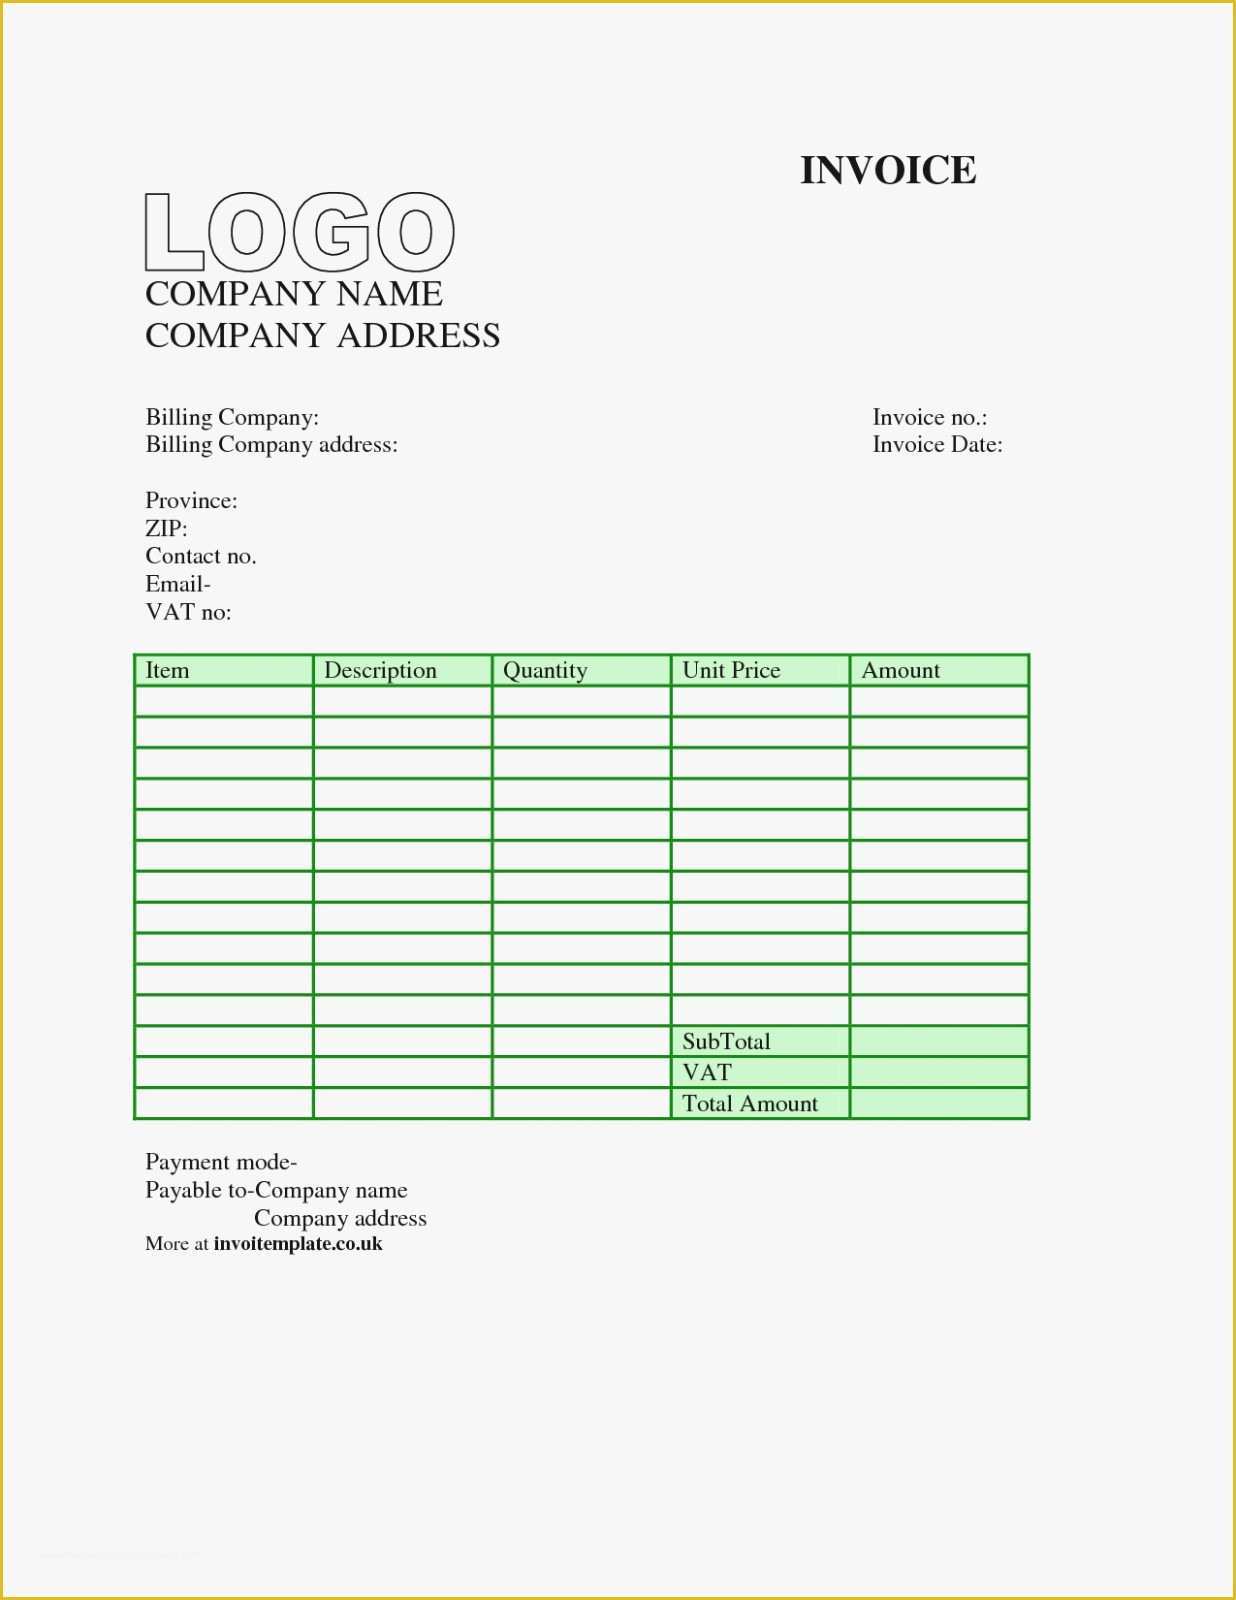 Free Blank Invoice Template Excel Of Free Downloadable Invoicete Word Blank Excel Resume